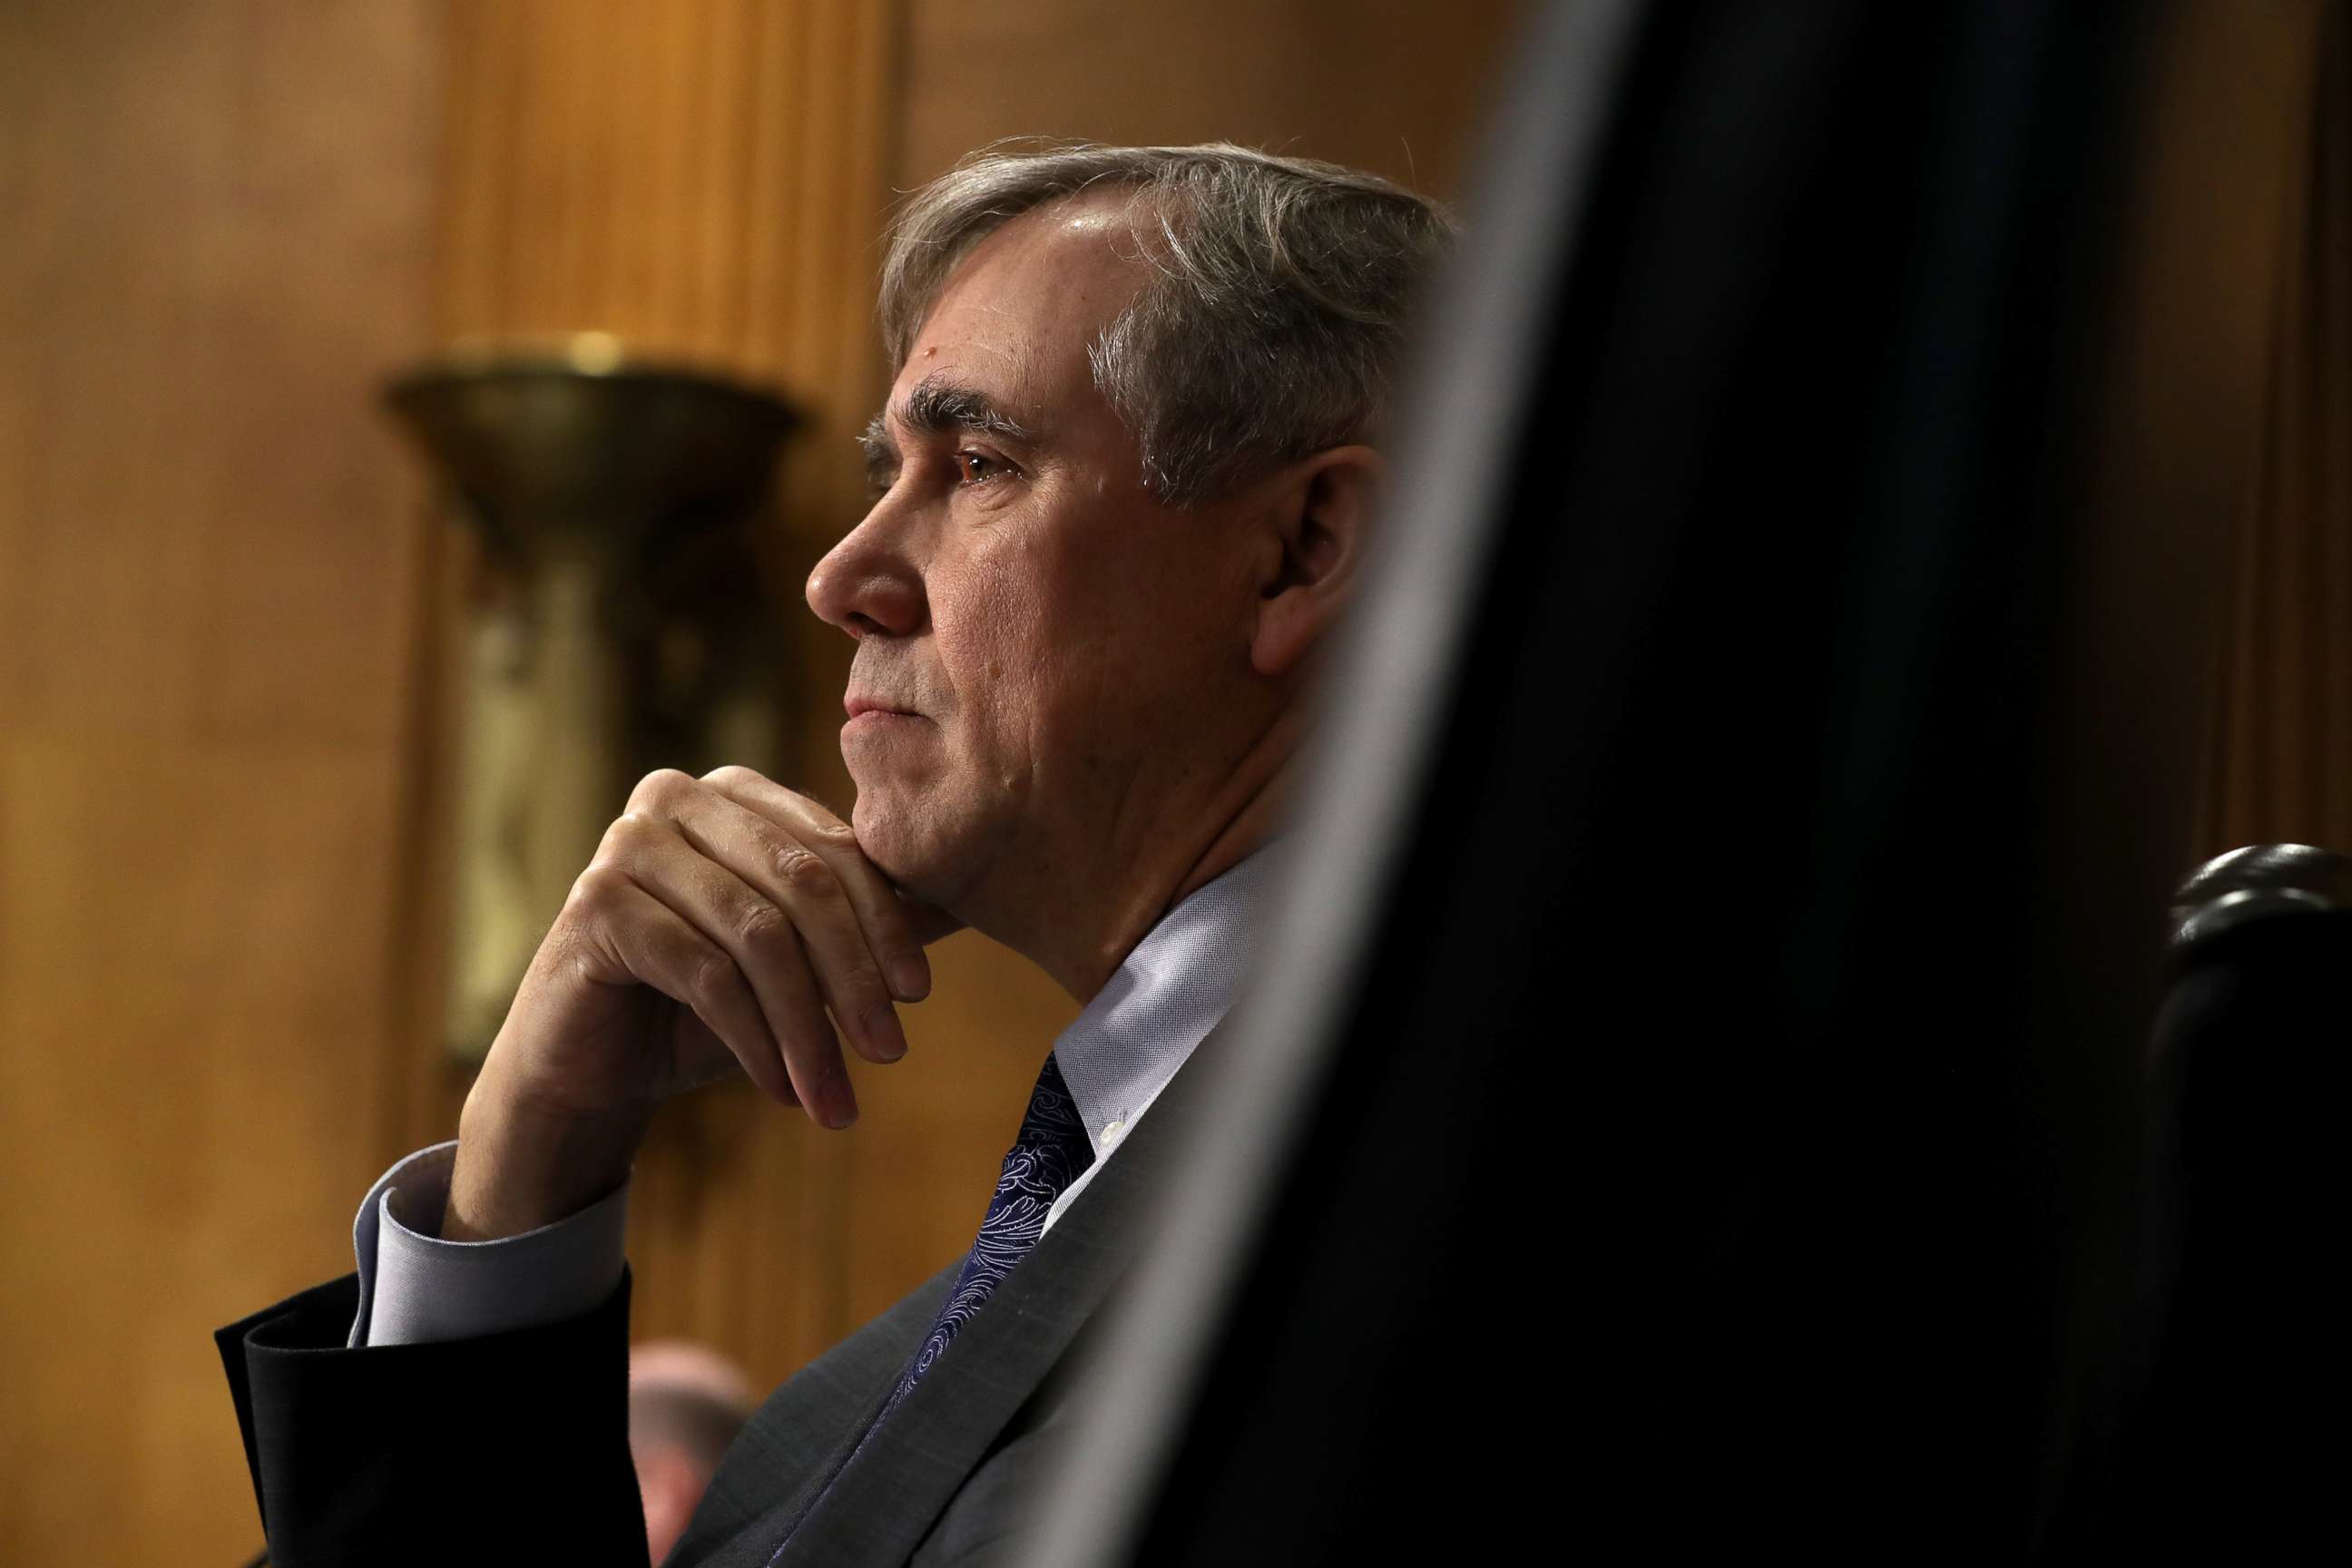 PHOTO: Senate Foreign Relations Committee member Sen. Jeff Merkley questions witnesses during a hearing about U.S.-Russia relations in the Dirksen Senate Office Building on Capitol Hill, Dec. 03, 2019, in Washington.